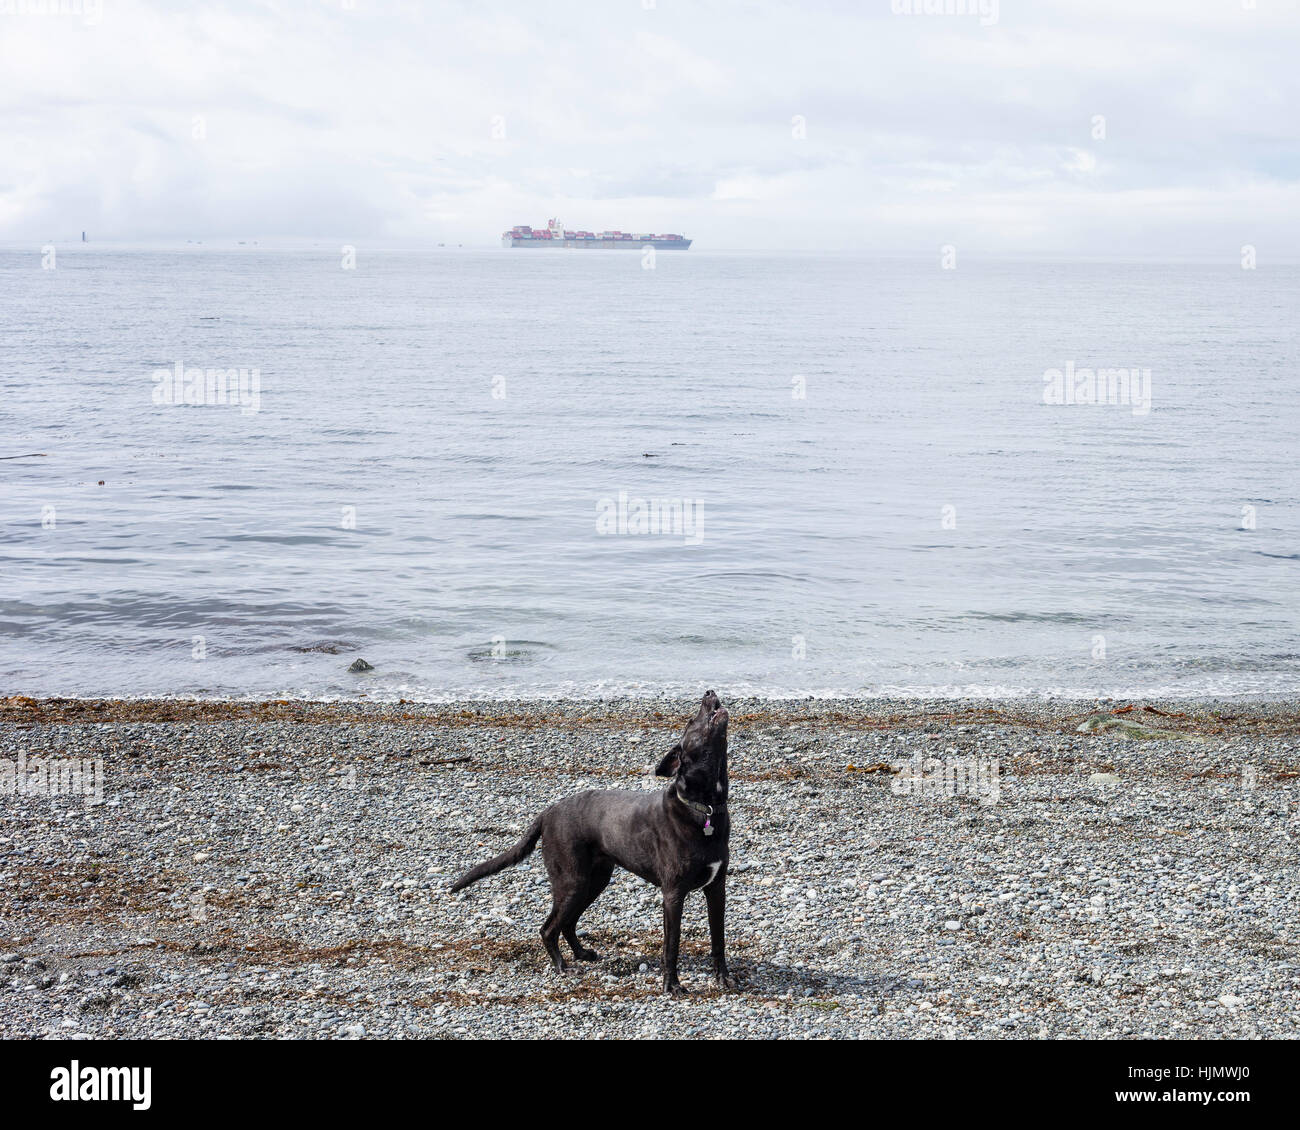 Dog barking at shore with cargo ship in background.  Victoria, BC. Canada Stock Photo